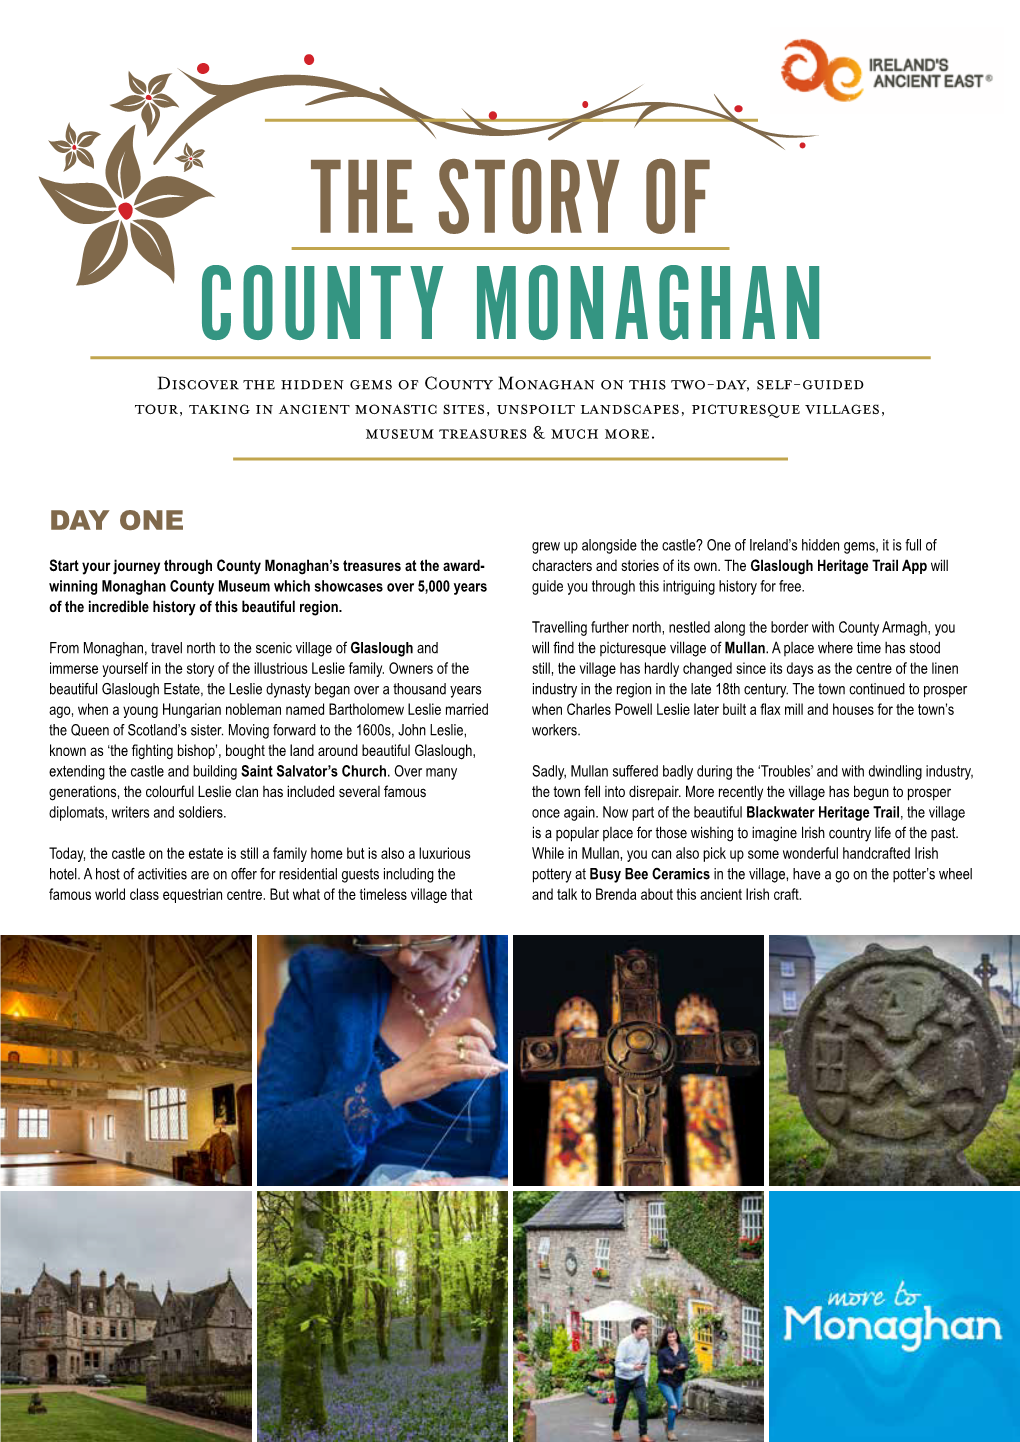 The Story of County Monaghan